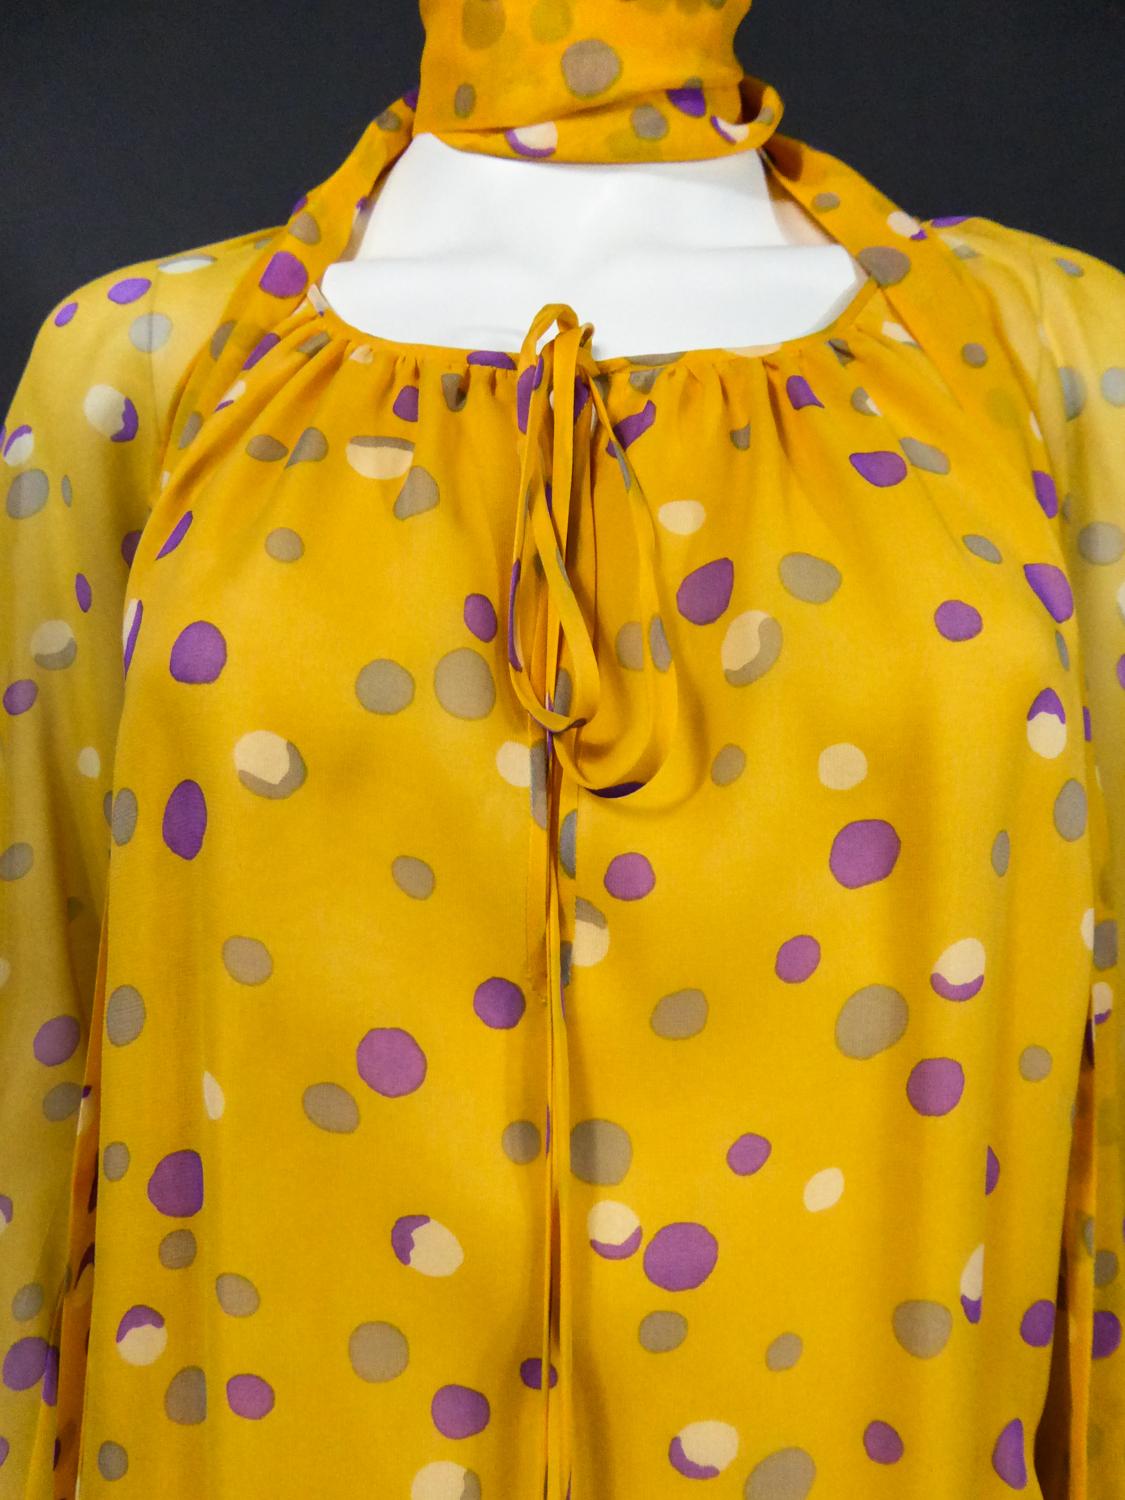 Yves Saint Laurent Couture Chiffon Blouse and Skirt Numbered 39377 Circa 1975 2